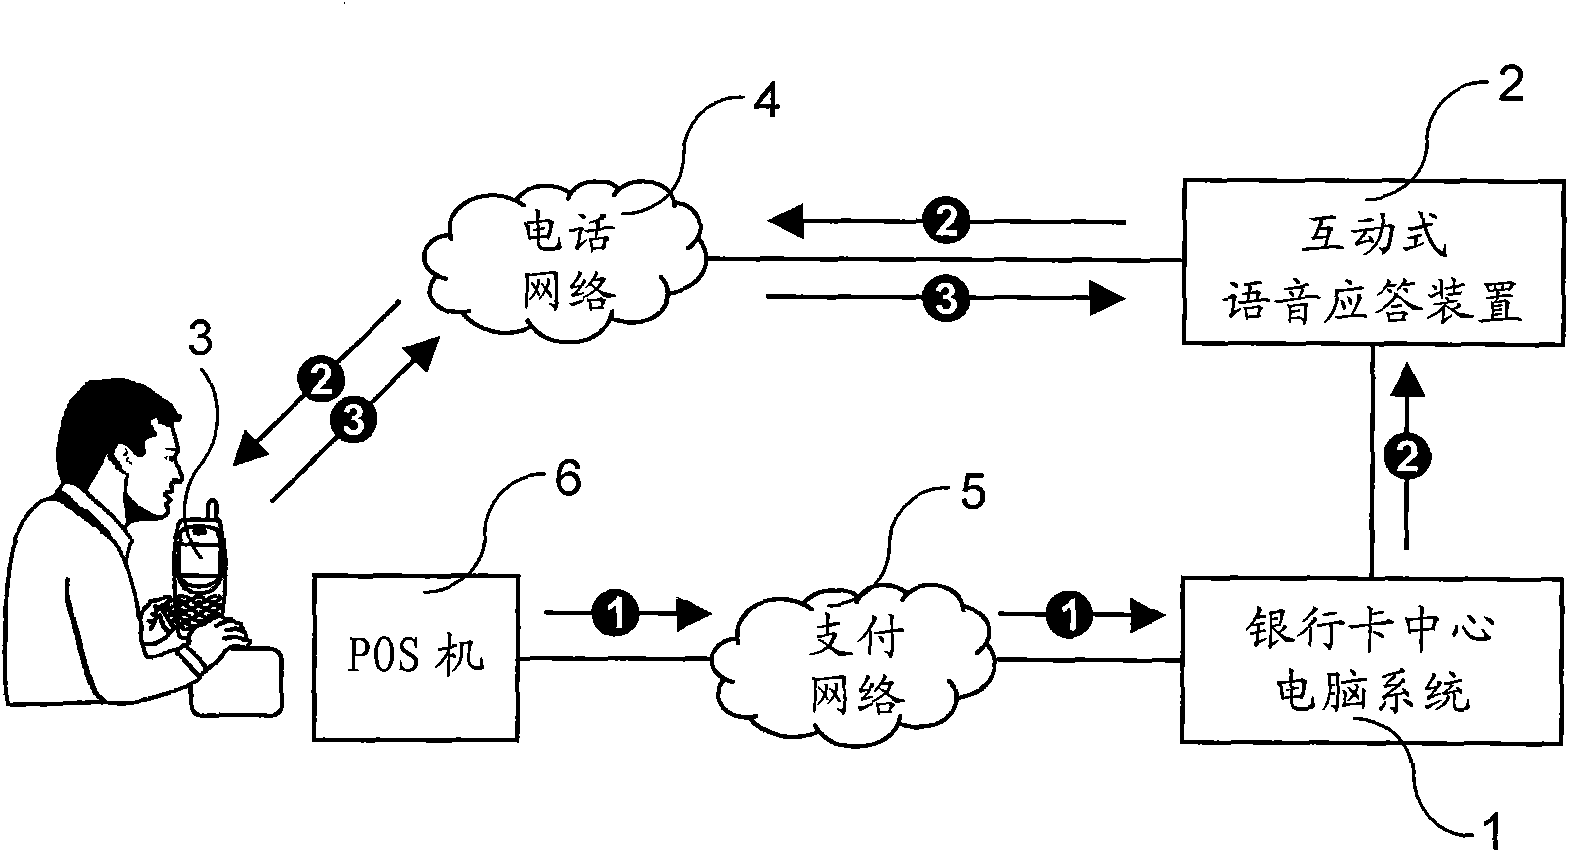 Security guarding method for automatically calling to inform customer of transferring and paying of bank card account